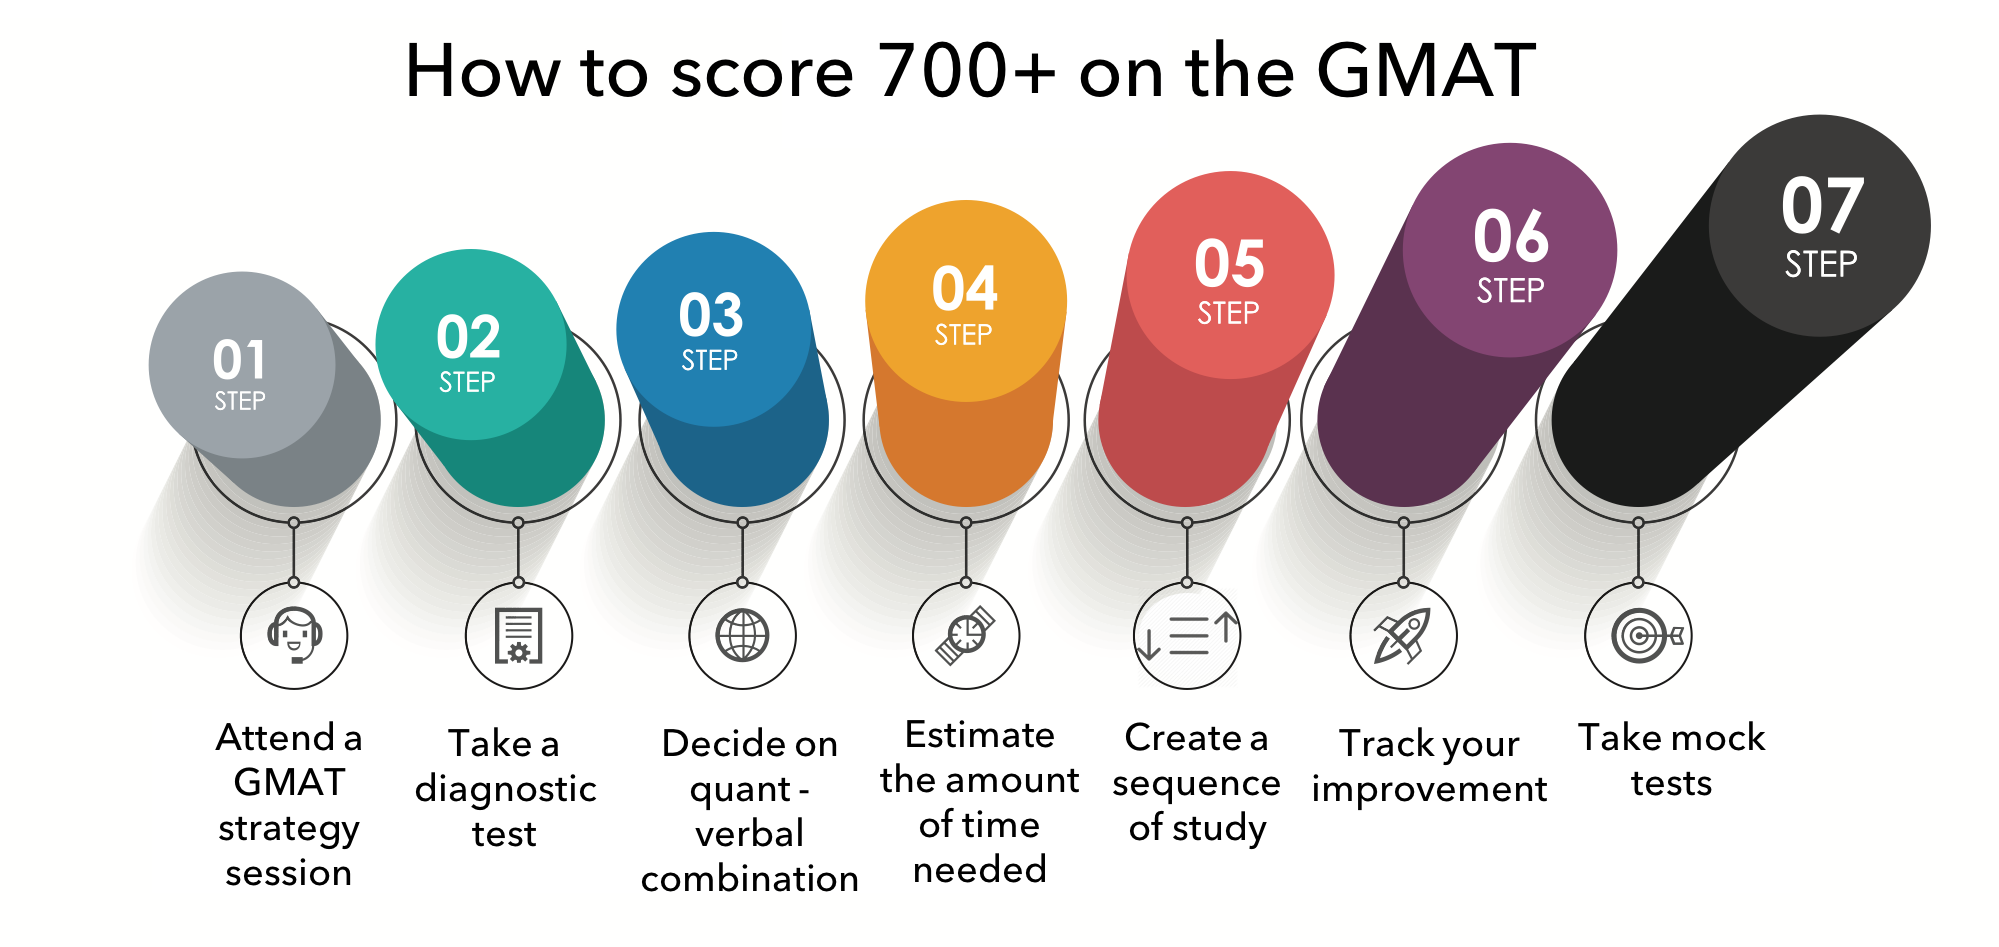 how to score 700+ on the GMAT